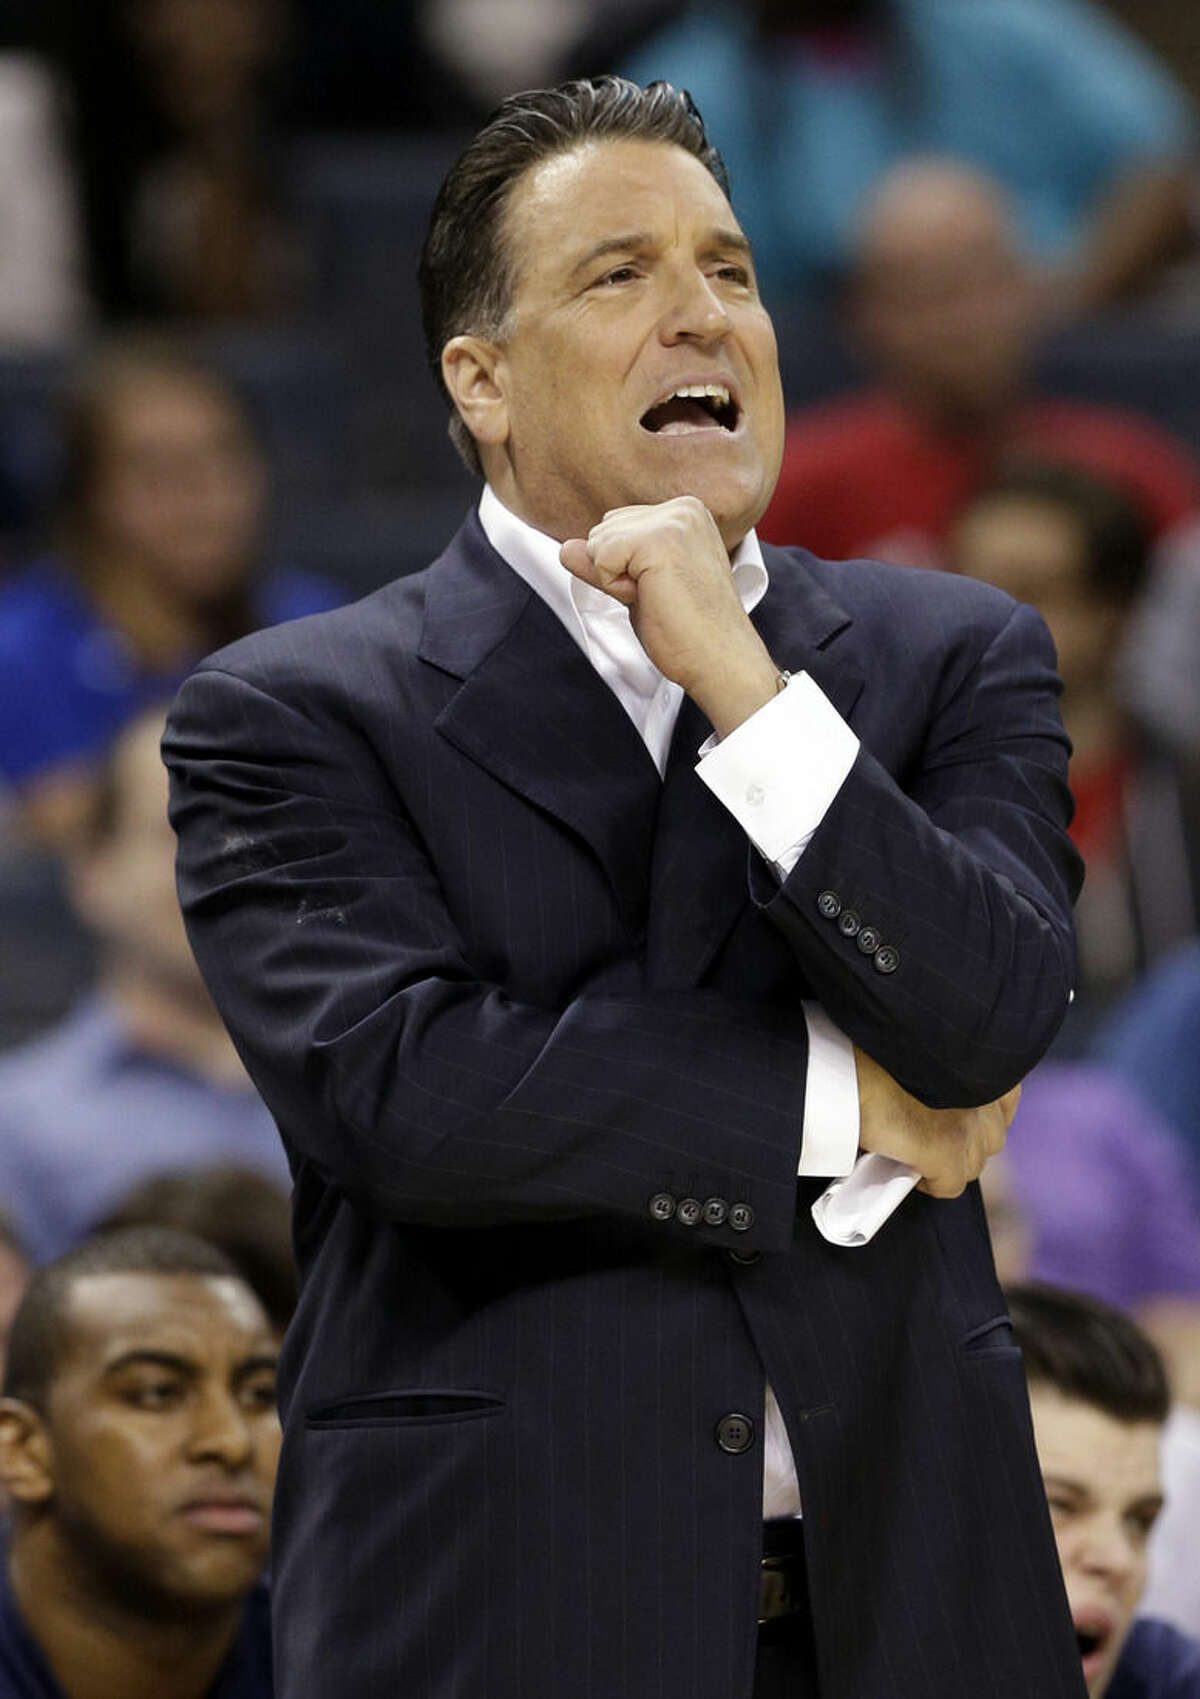 St. John's head coach Steve Lavin directs his team against San Diego State during the first half of an NCAA tournament college basketball game in the Round of 64 in Charlotte, N.C., Friday, March 20, 2015. (AP Photo/Nell Redmond)